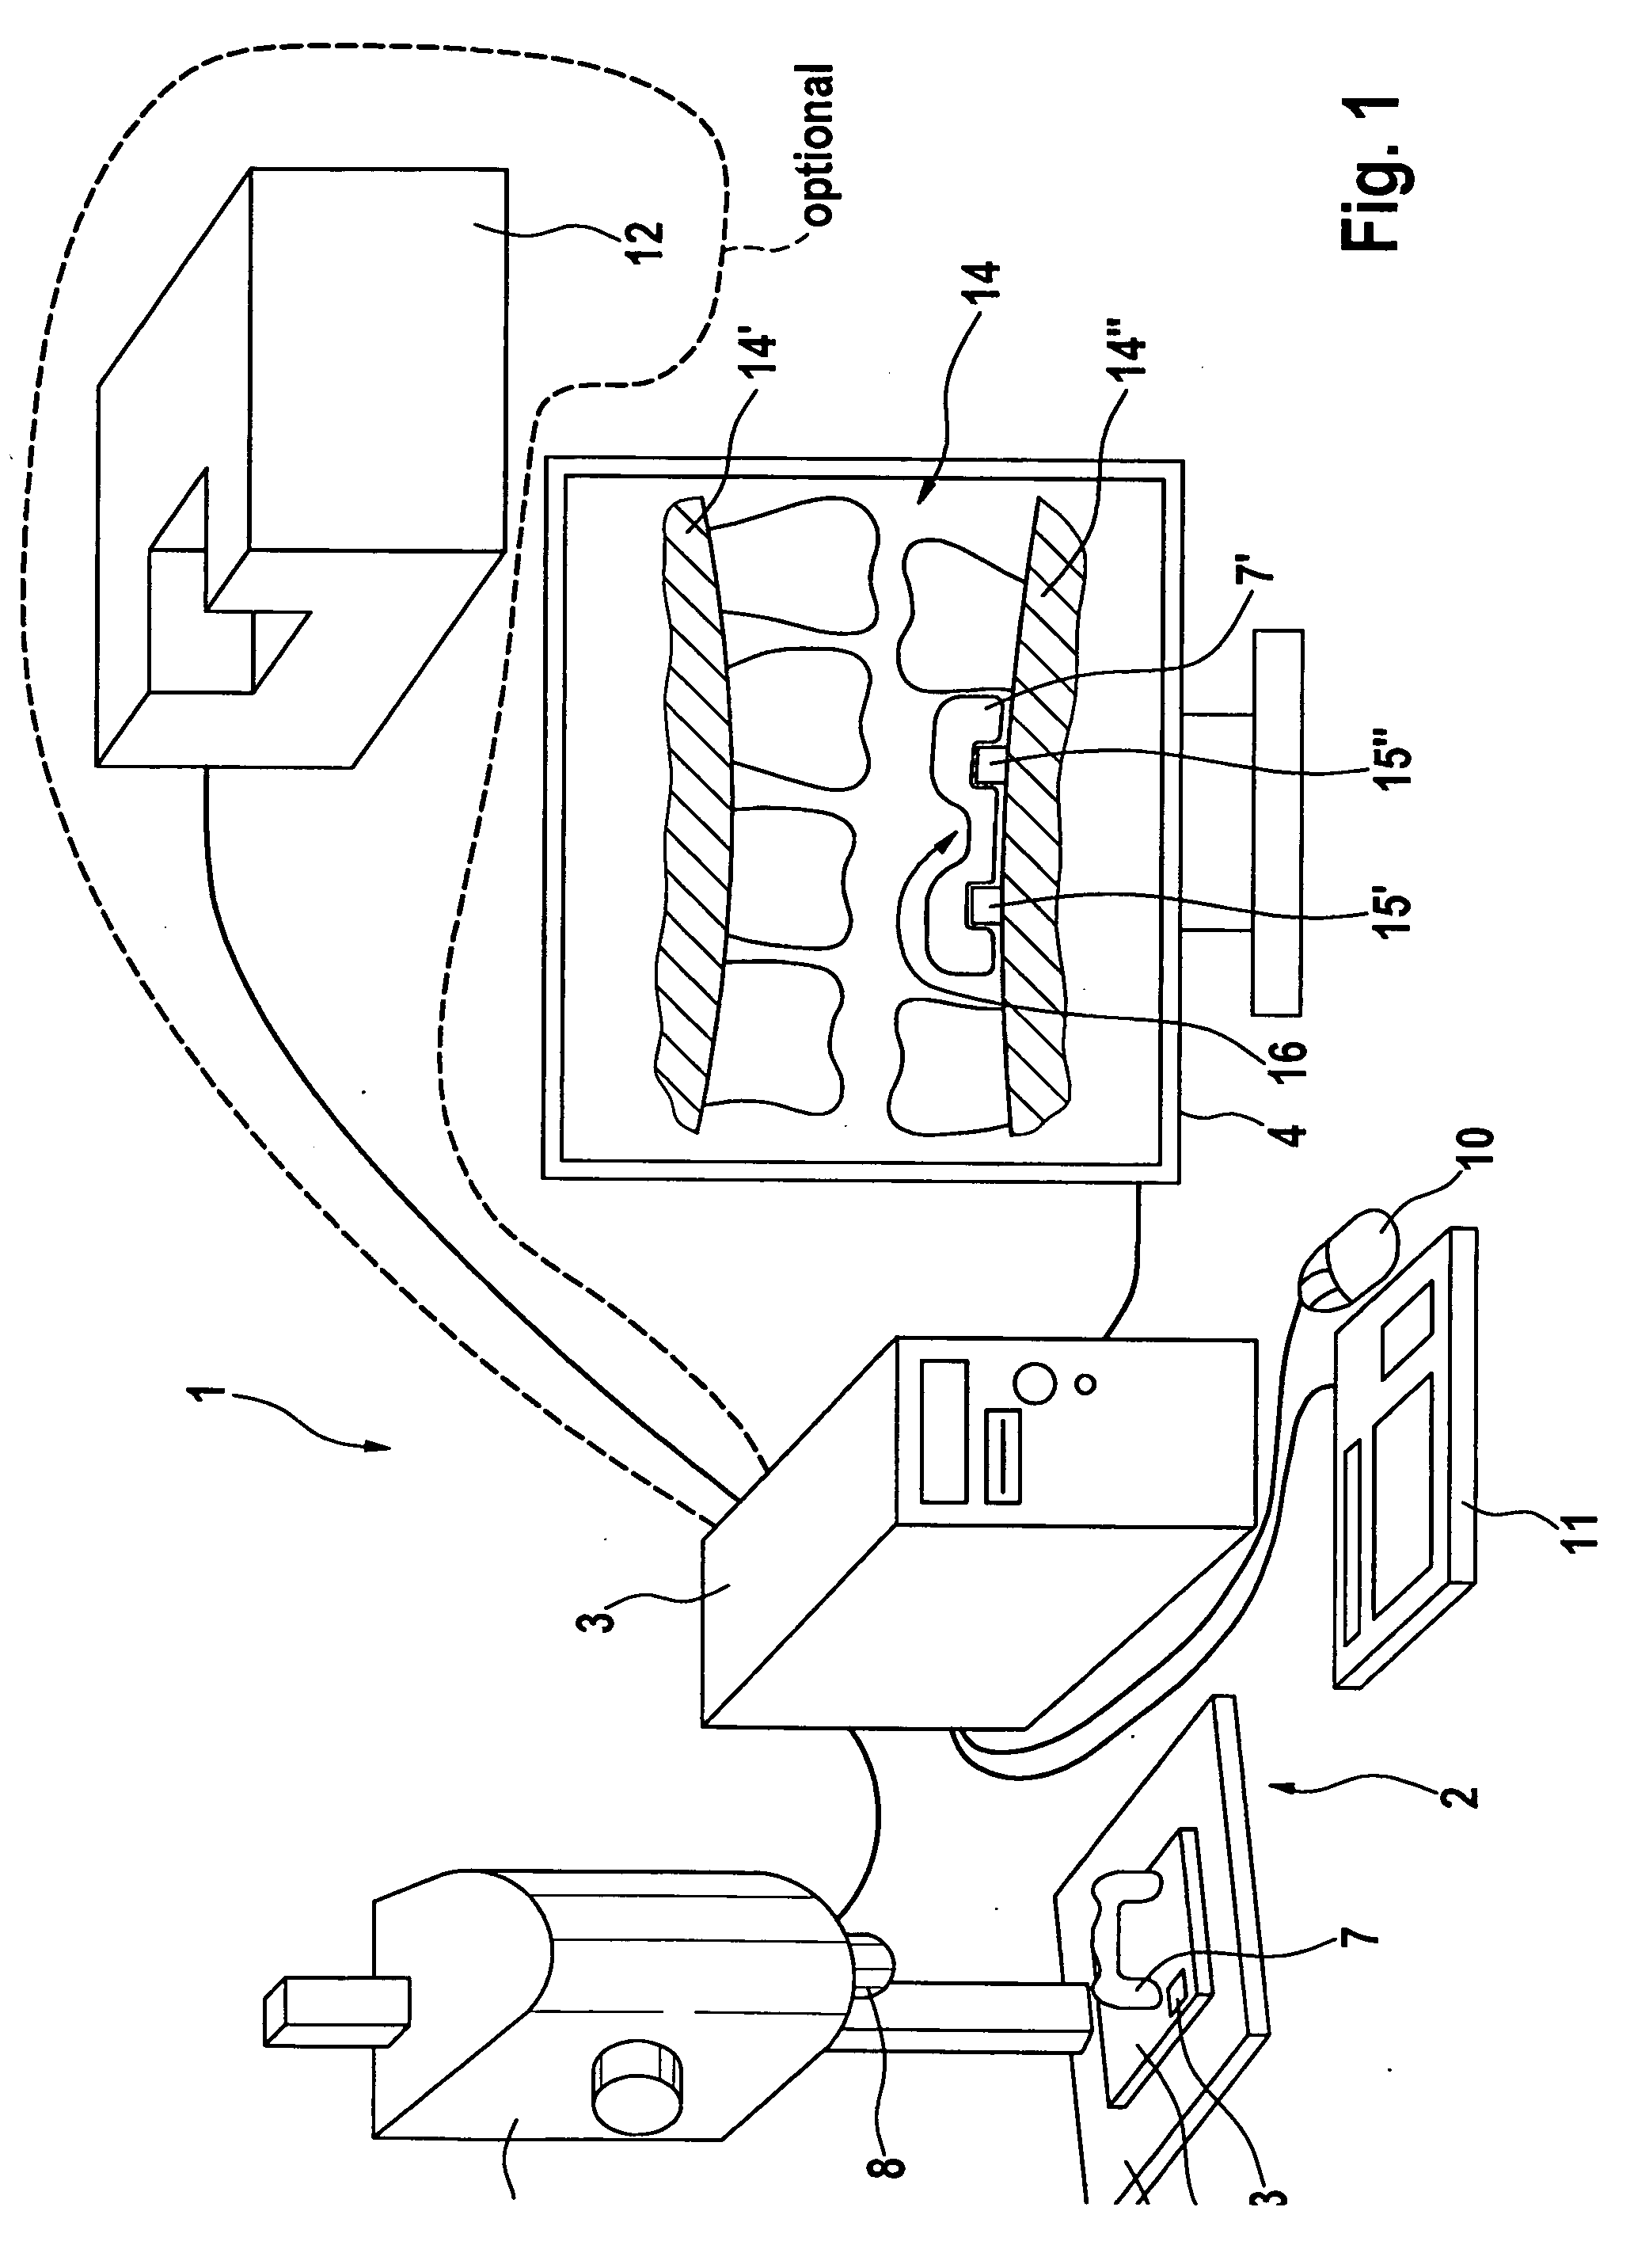 Method and Device for Producing Dental Prosthesis Elements